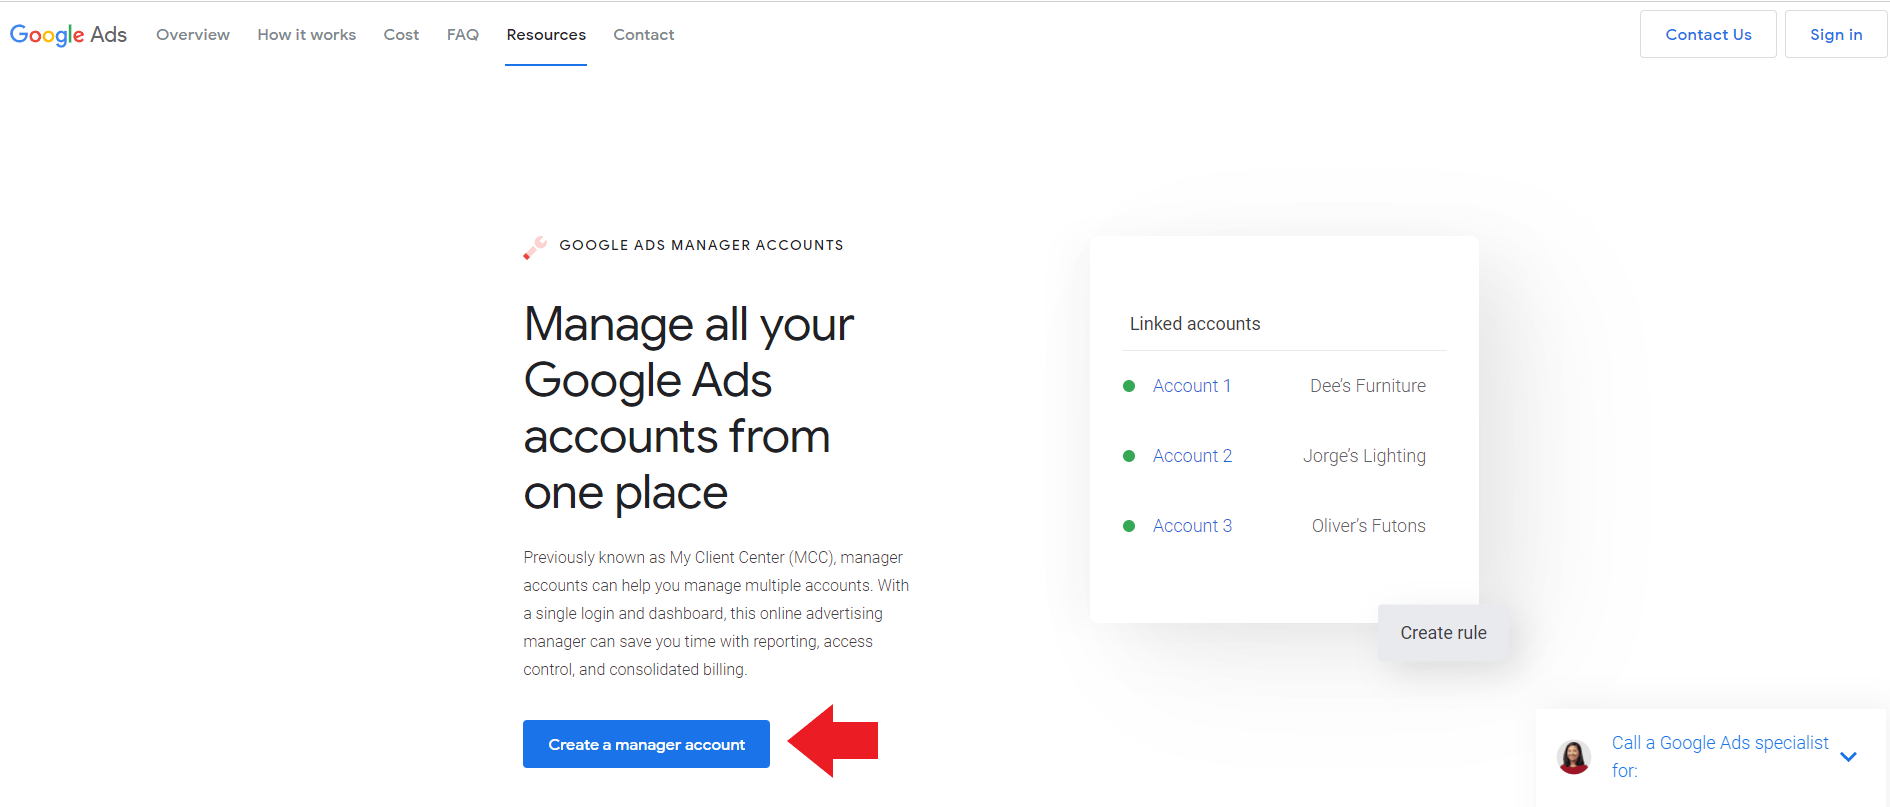 click "create a manager account"